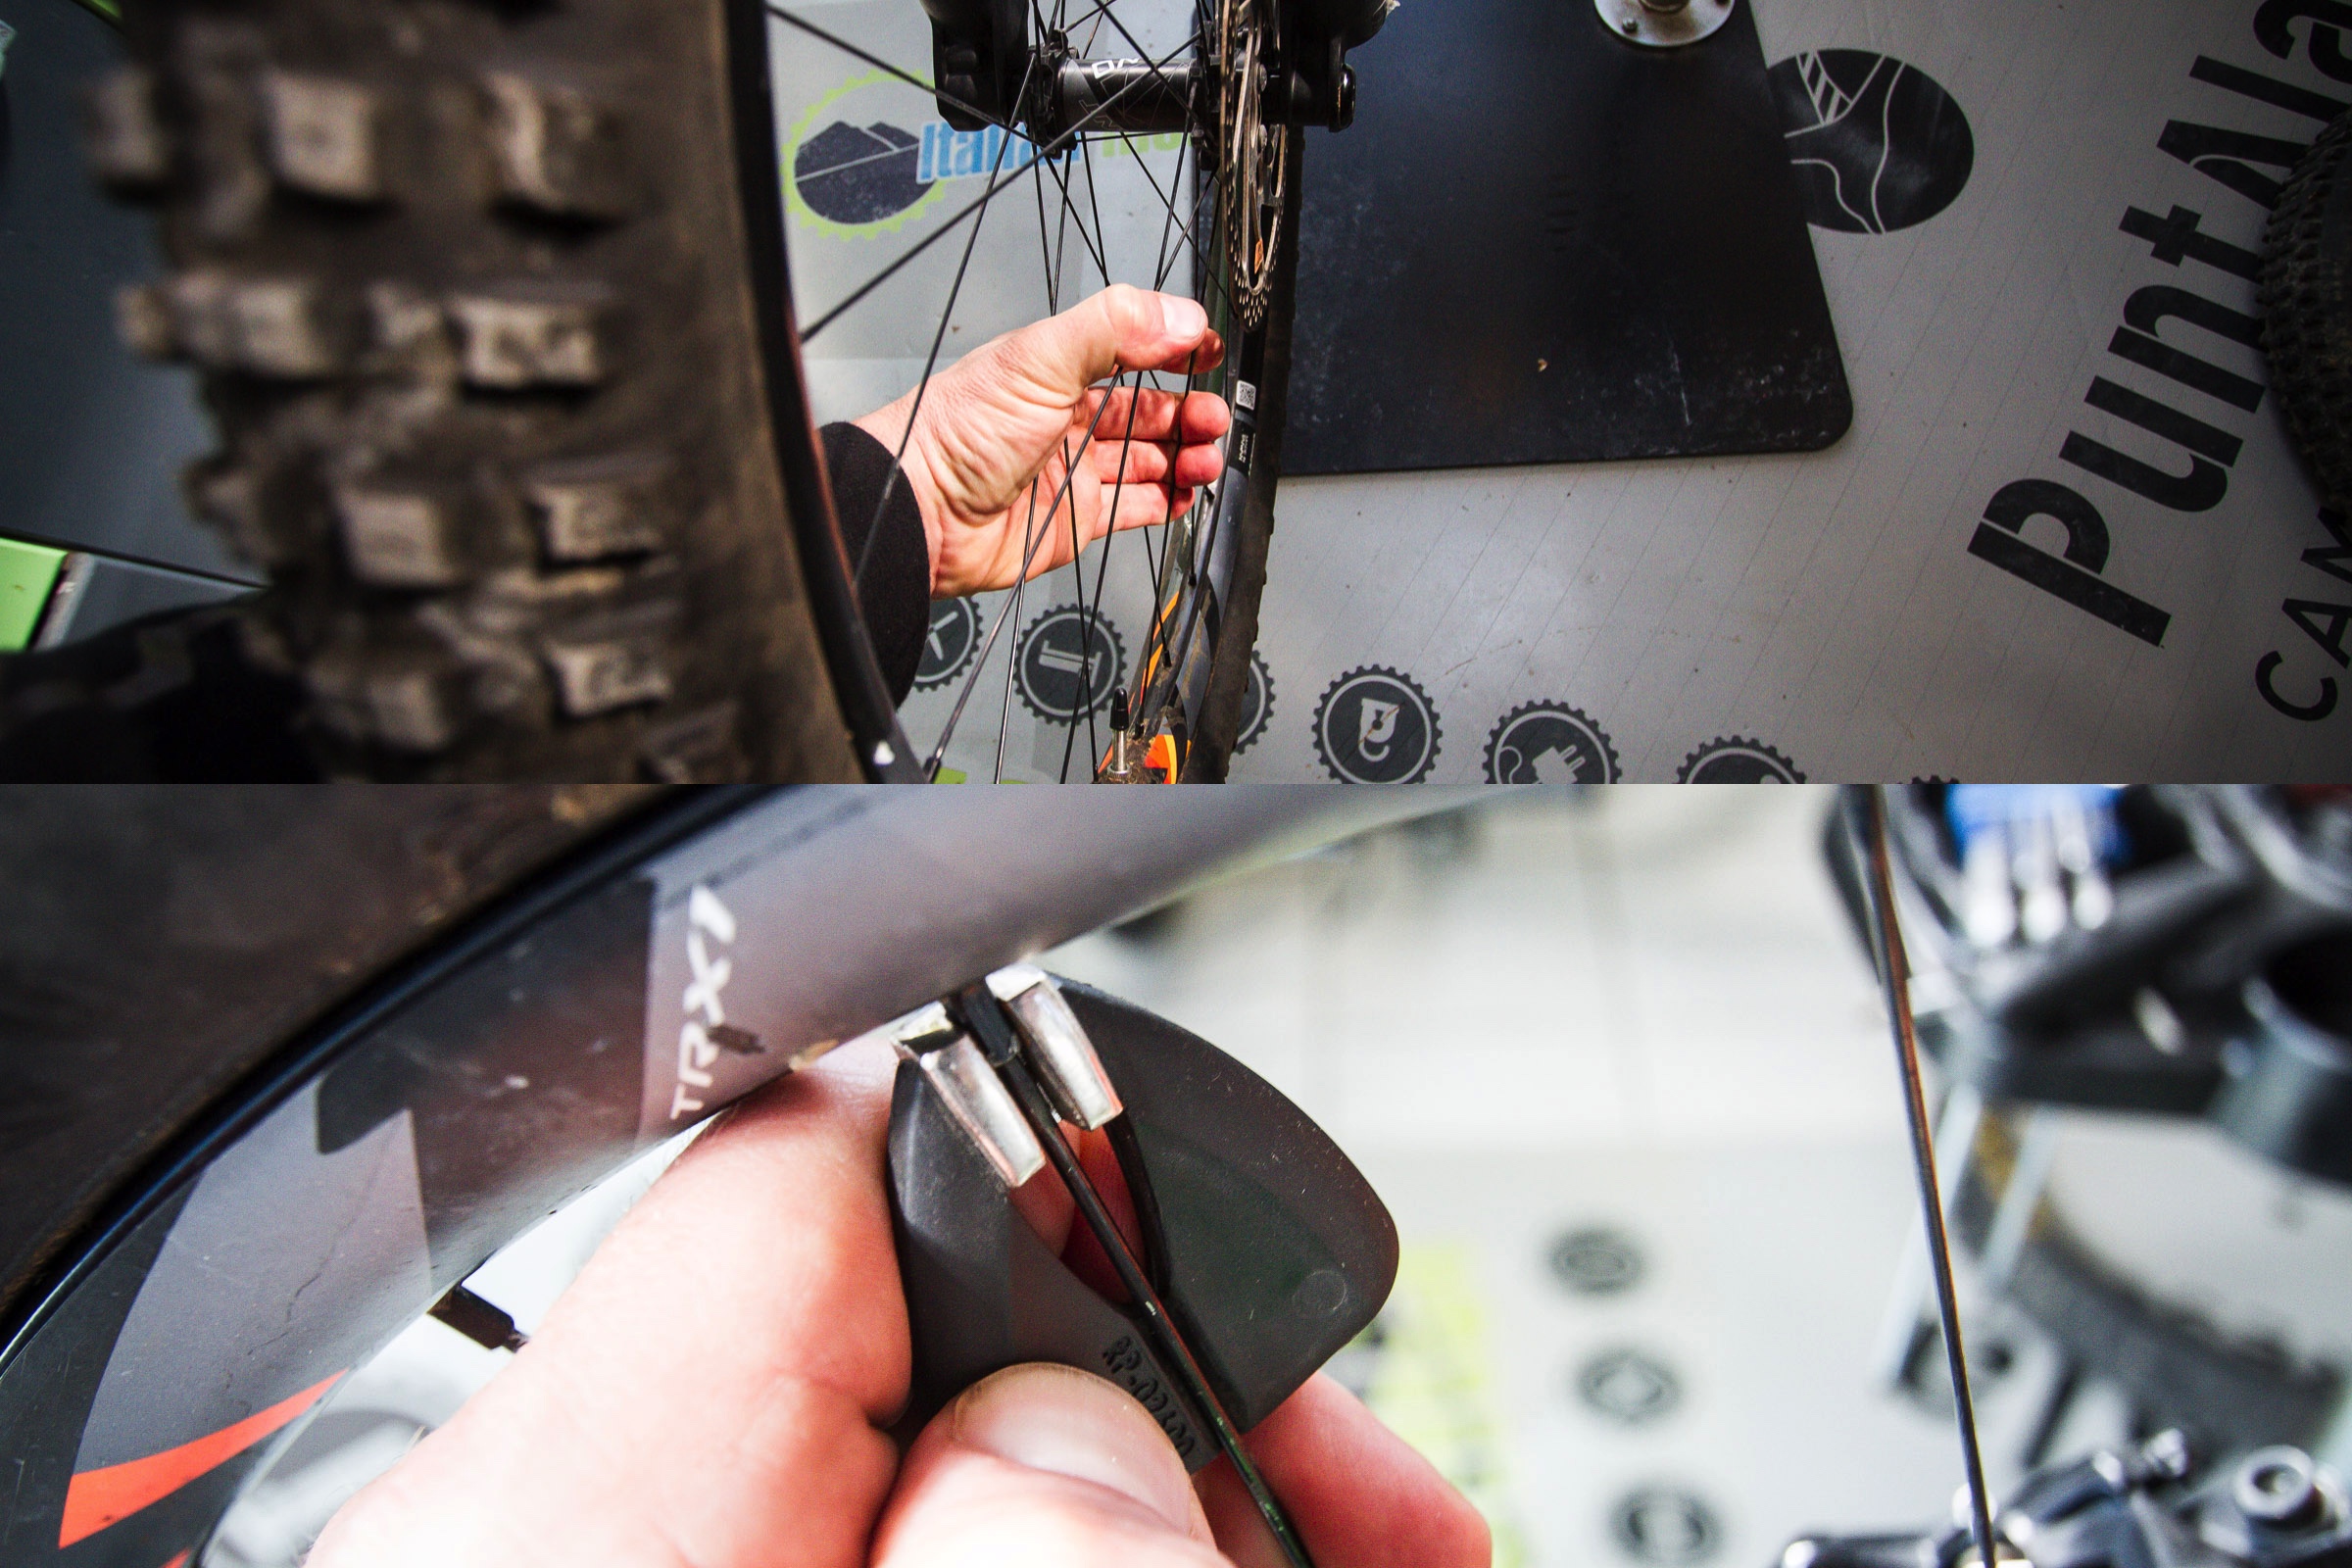 On each wheel grab a handful of spokes to check they are all without play and tensioned correctly, if loose tighten them a bit to make sure your wheel stays true no matter what you ride over.